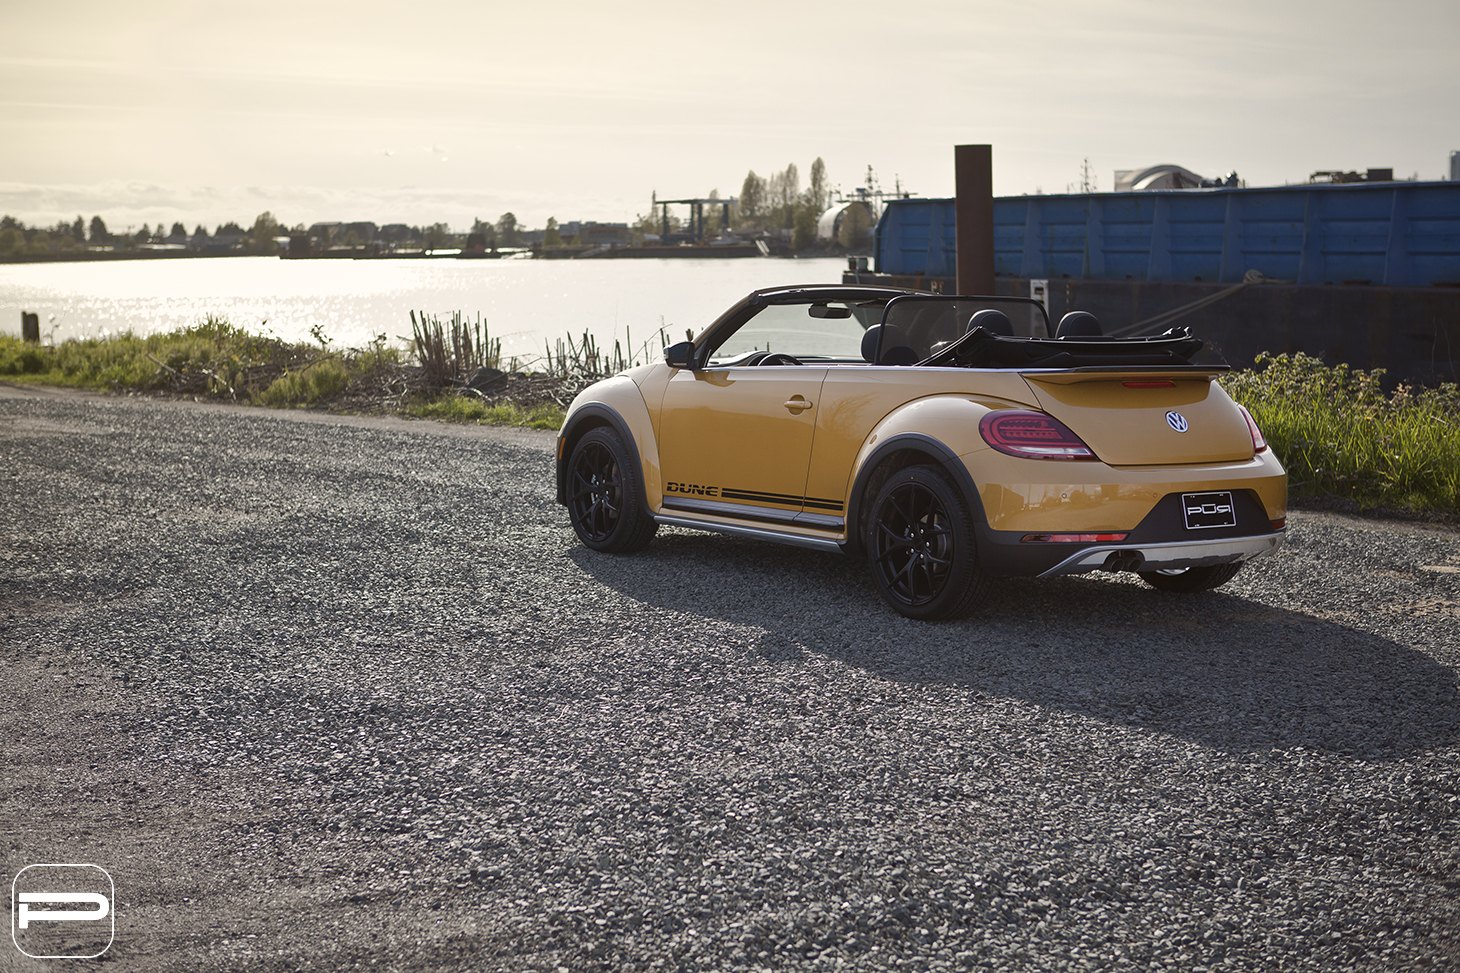 Aftermarket Rear Diffuser on Yellow Convertible VW Beetle - Photo by PUR Wheels